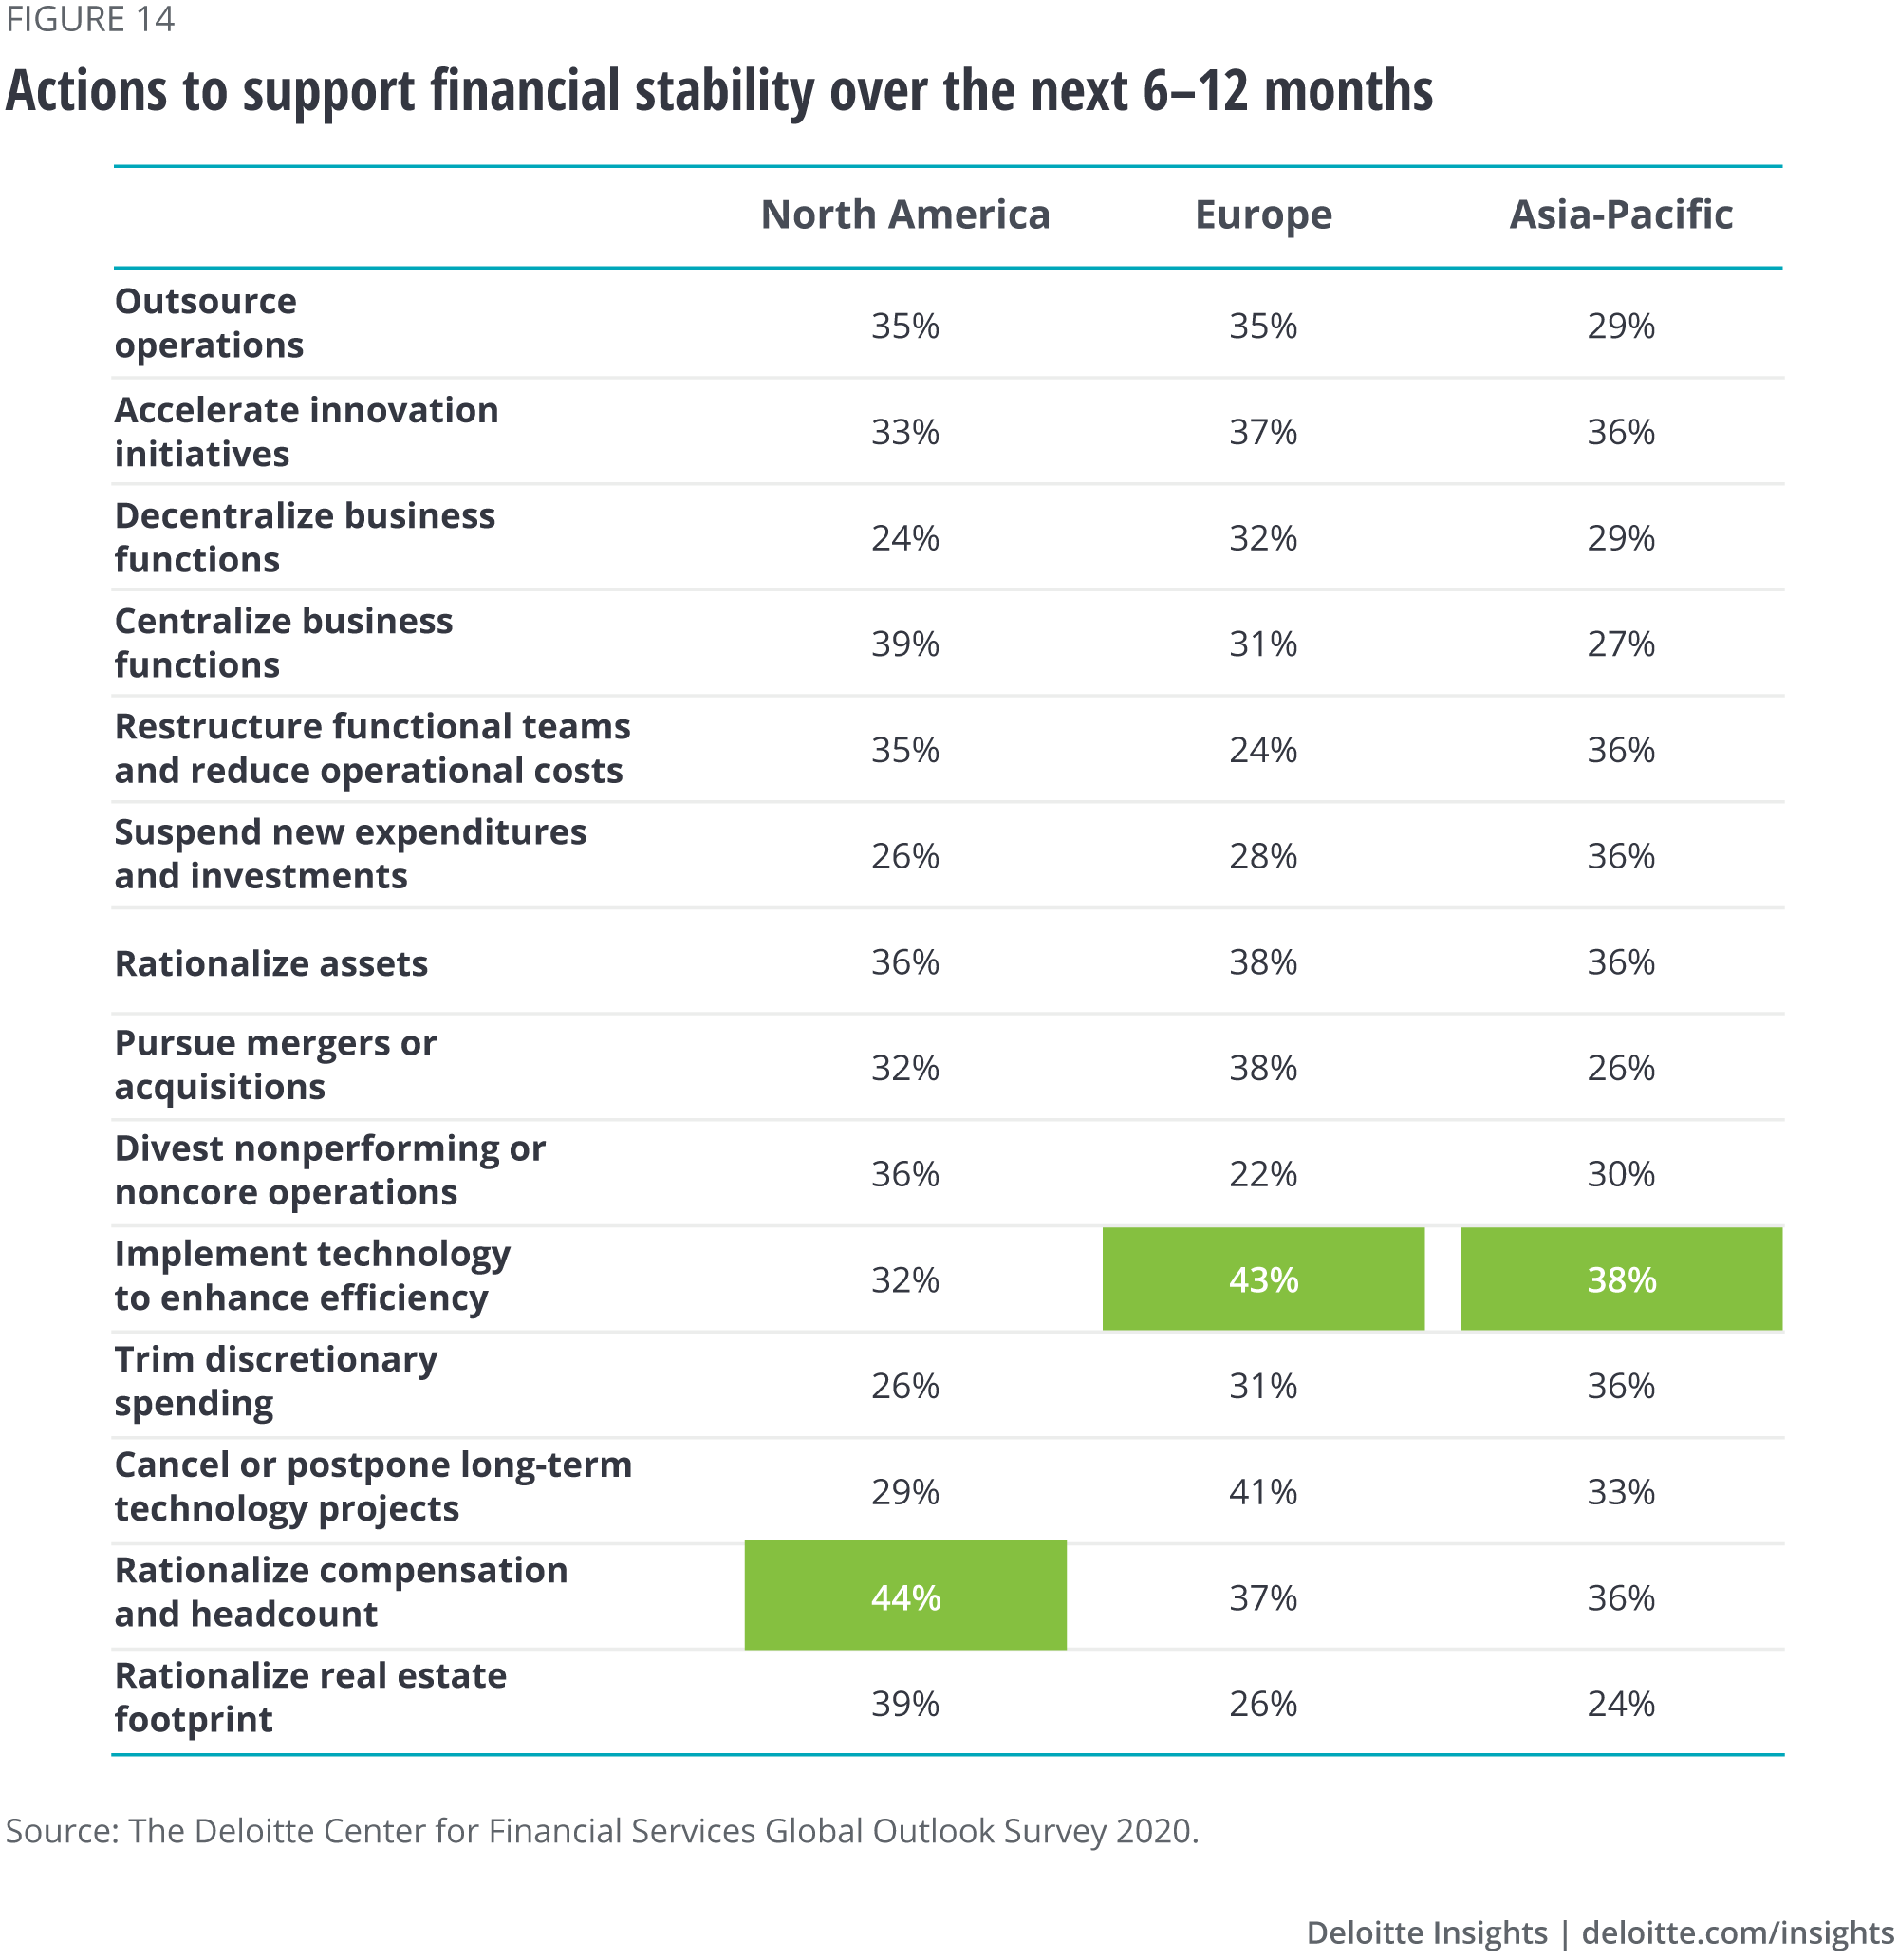 Actions to support financial stability over the next 6-12 months